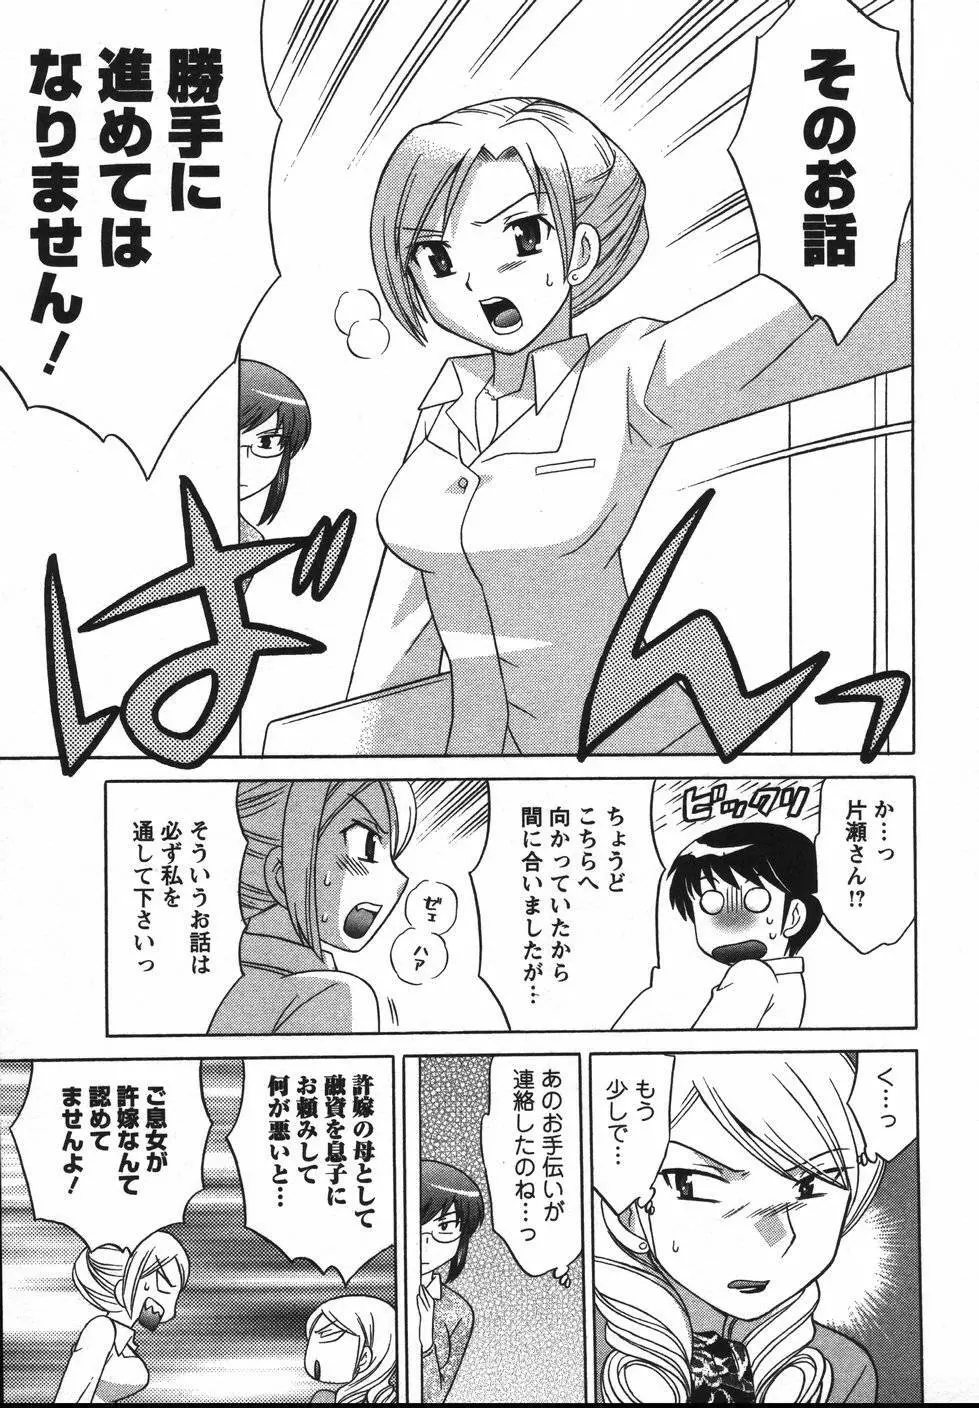 Colorfulこみゅーん☆ 第2巻 Page.160